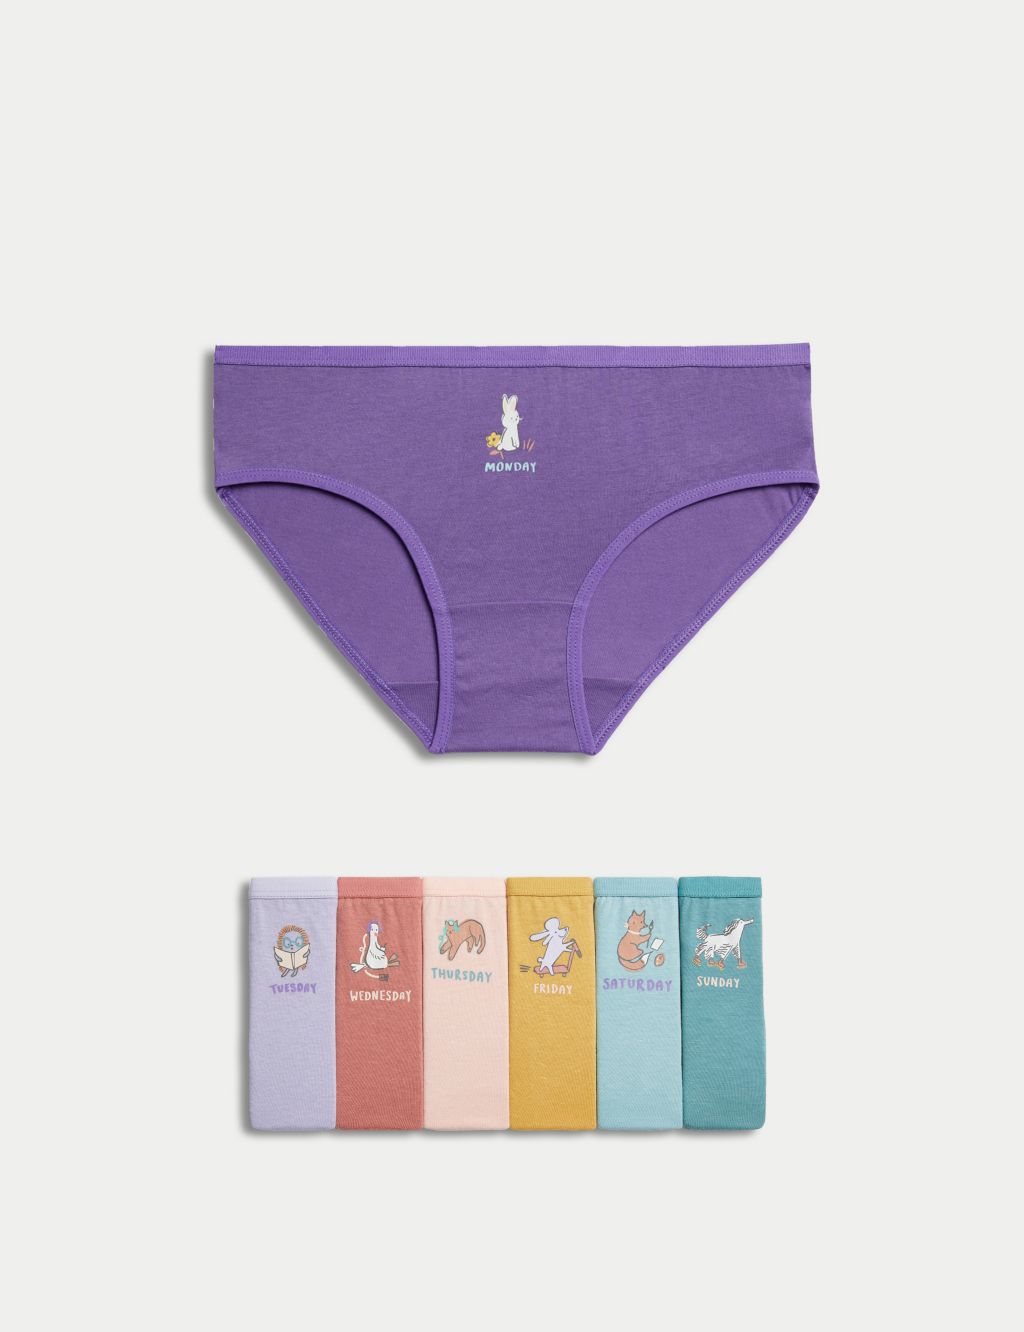 M&S GIRLS 10 PACK BRIEFS at Rs 225/pack, Velampalayam